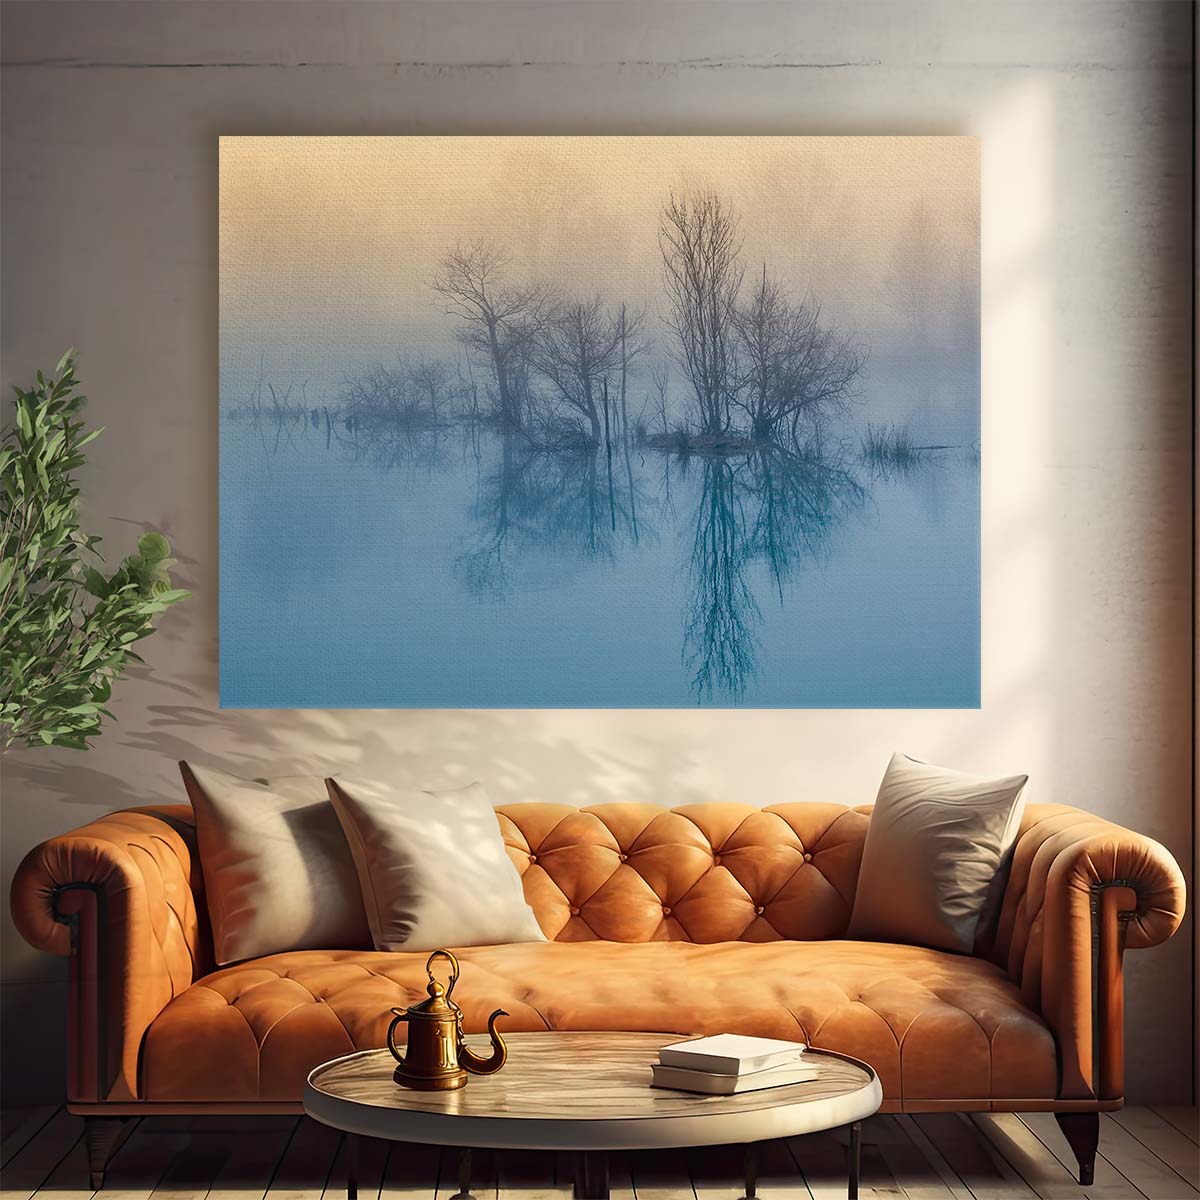 Sunrise Reflections in Tuscany Lake Wall Art by Luxuriance Designs. Made in USA.